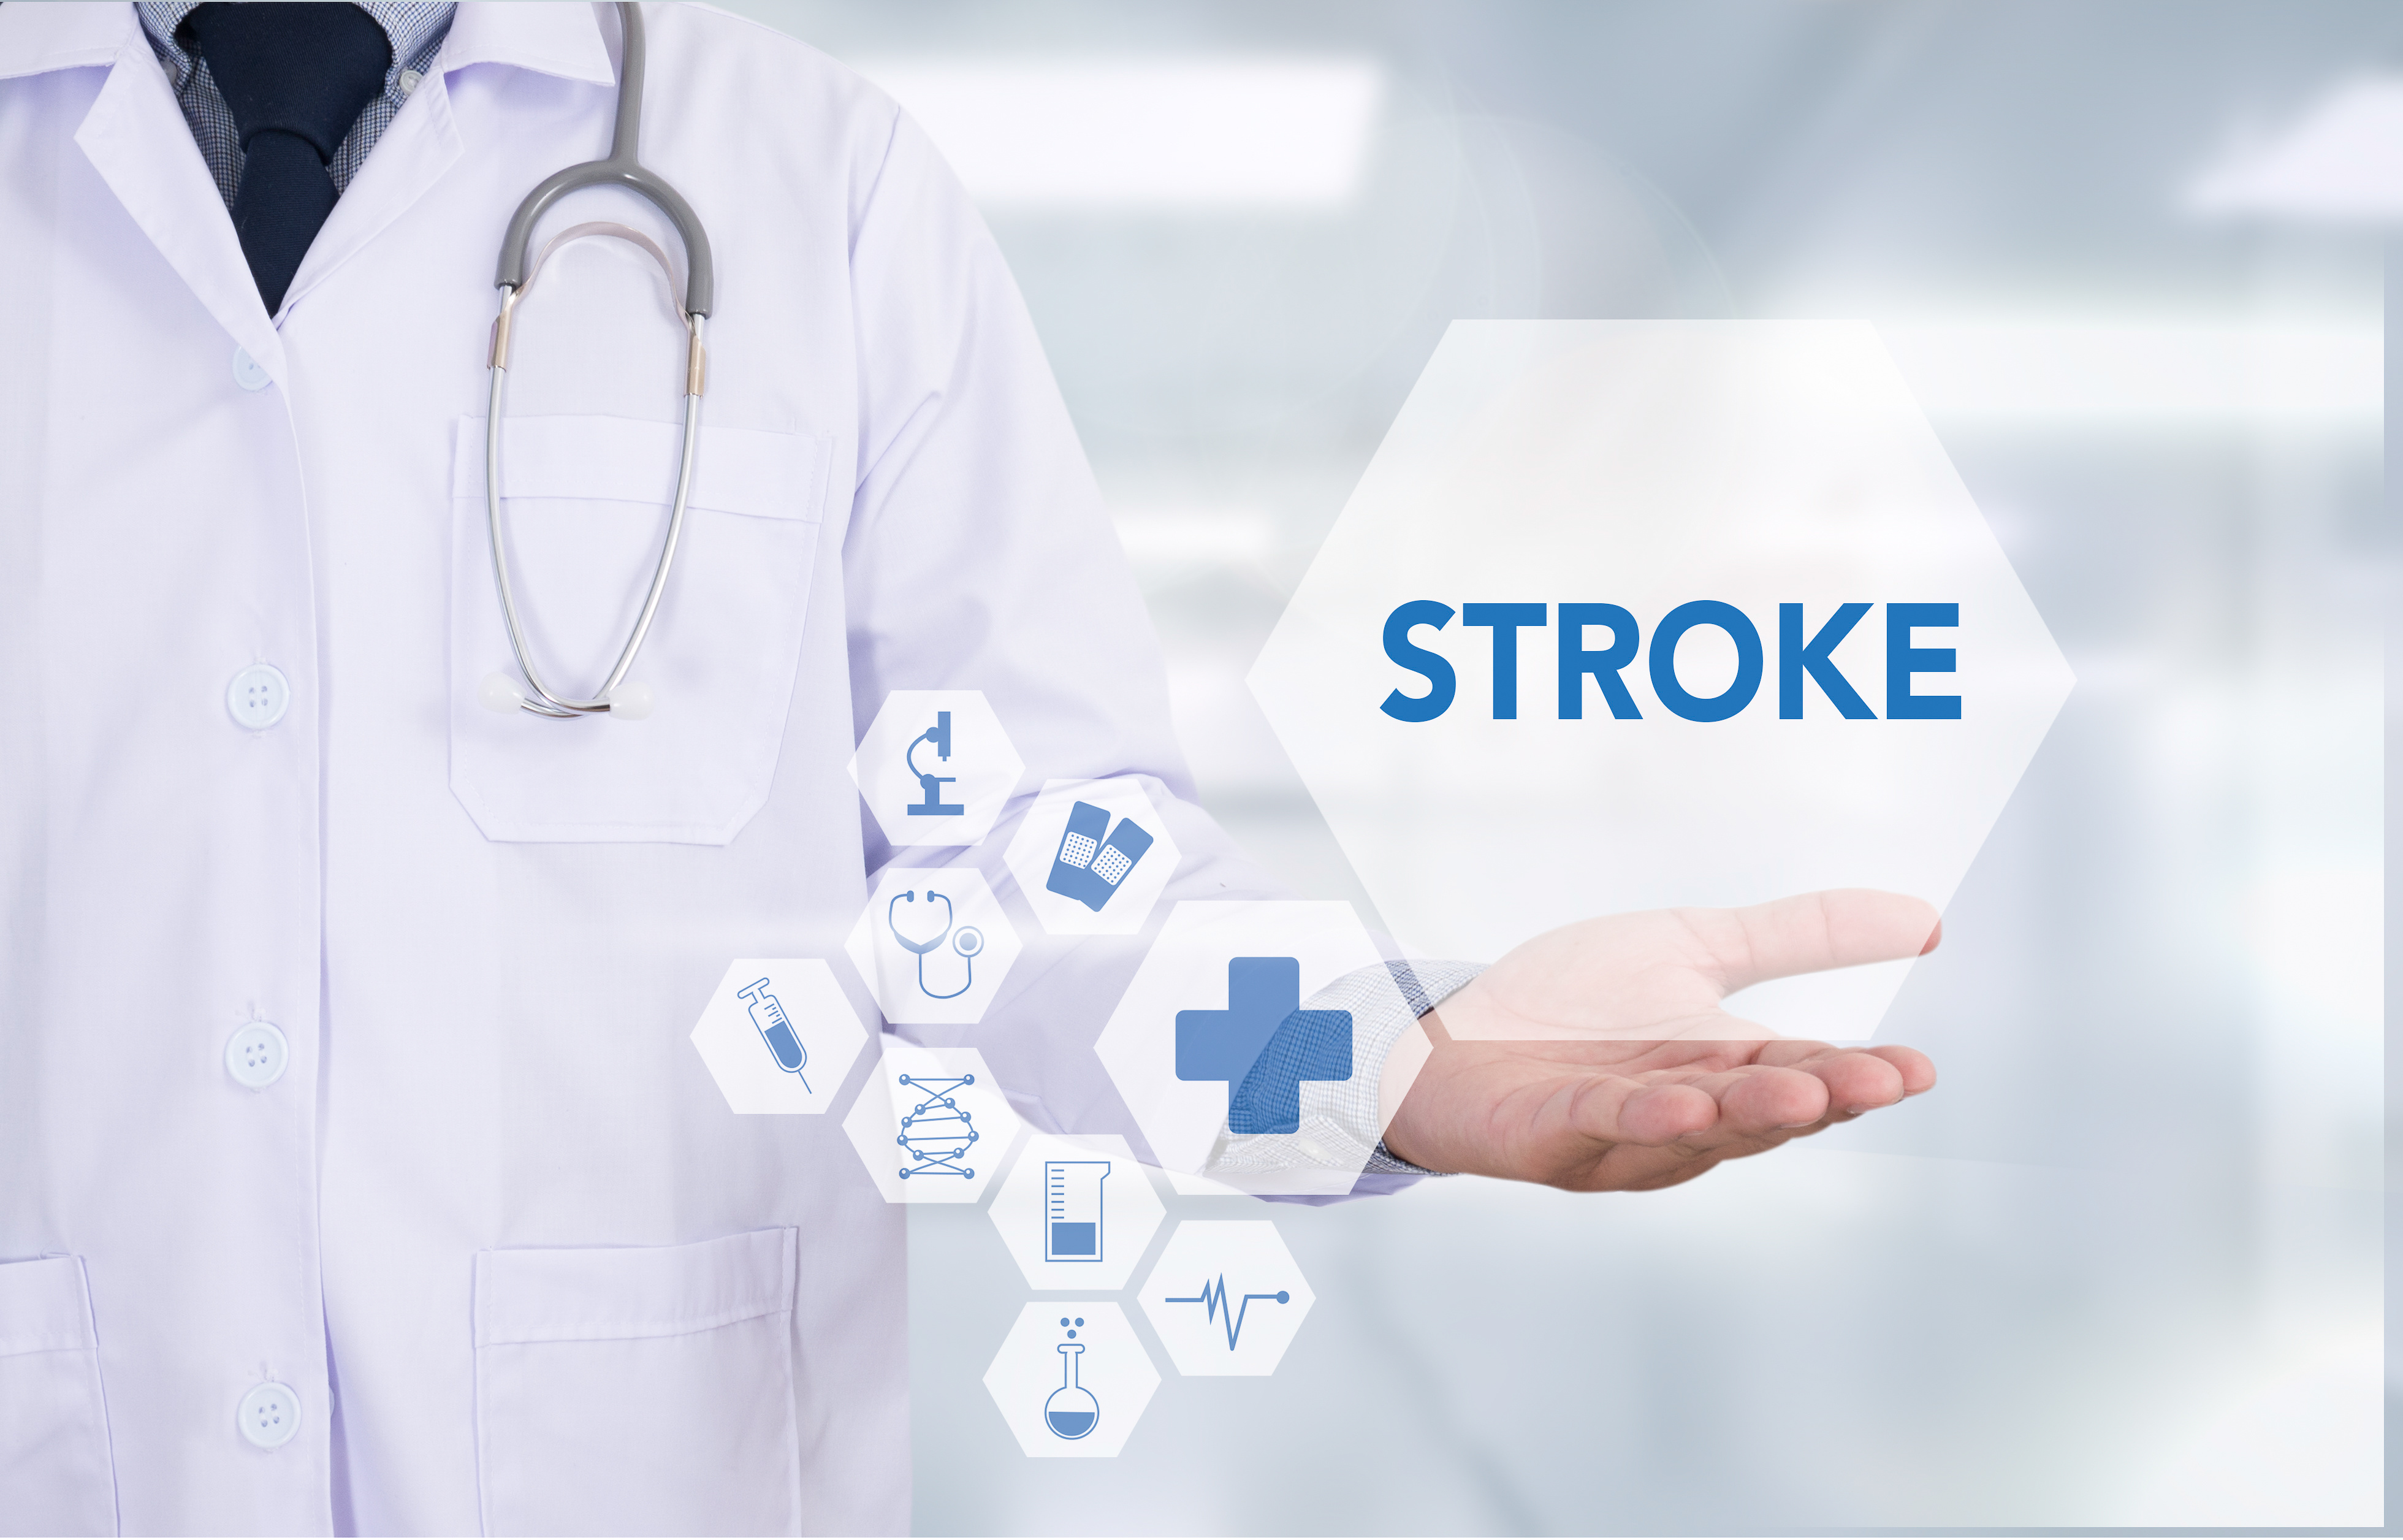 life-insurance-after-stroke-concept